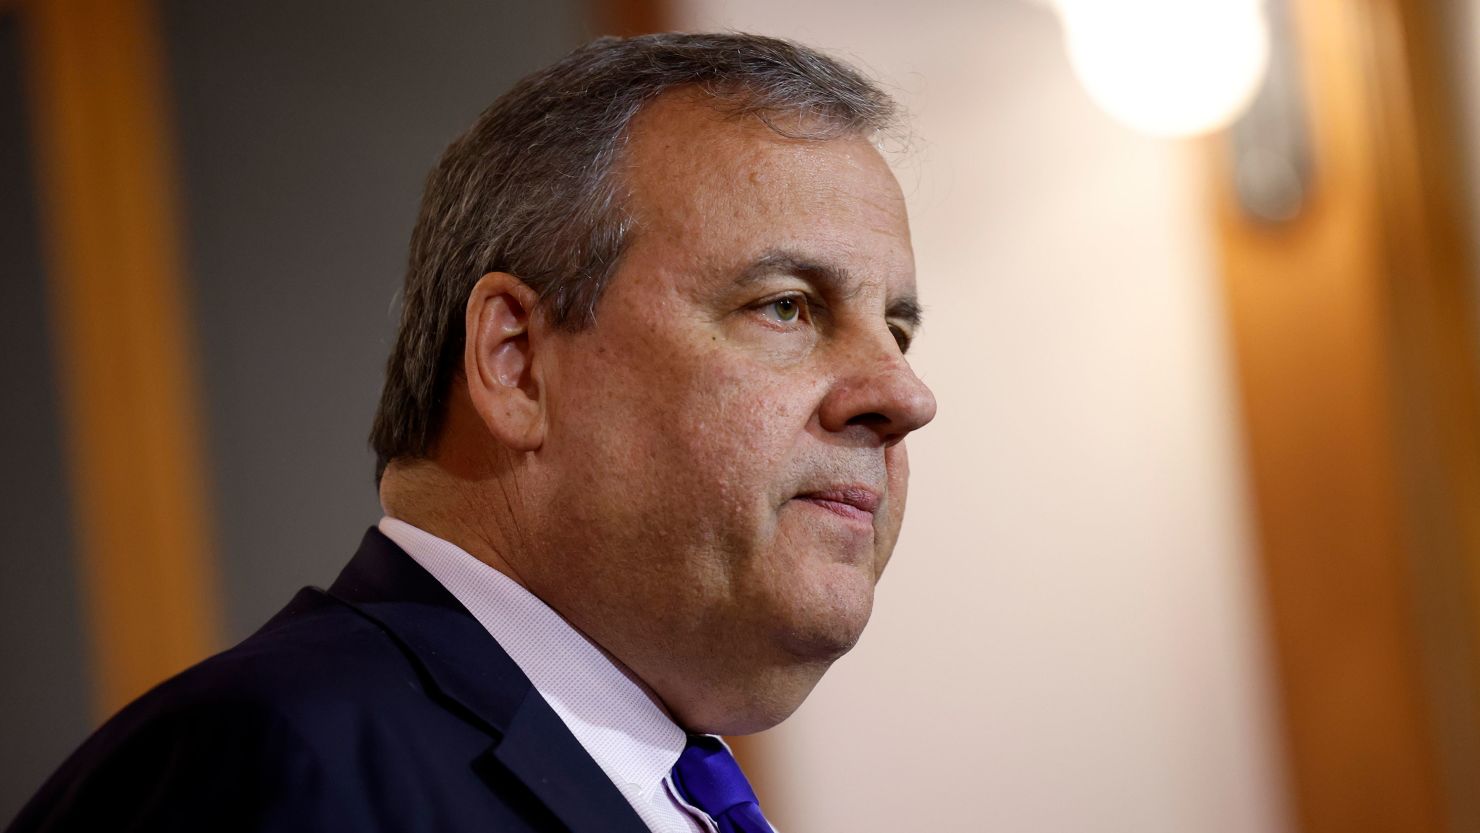 Windham, NH - January 10: Chris Christie announces he is dropping out of the Republican presidential race at Searles School and Chapel. (Photo by Danielle Parhizkaran/The Boston Globe via Getty Images)